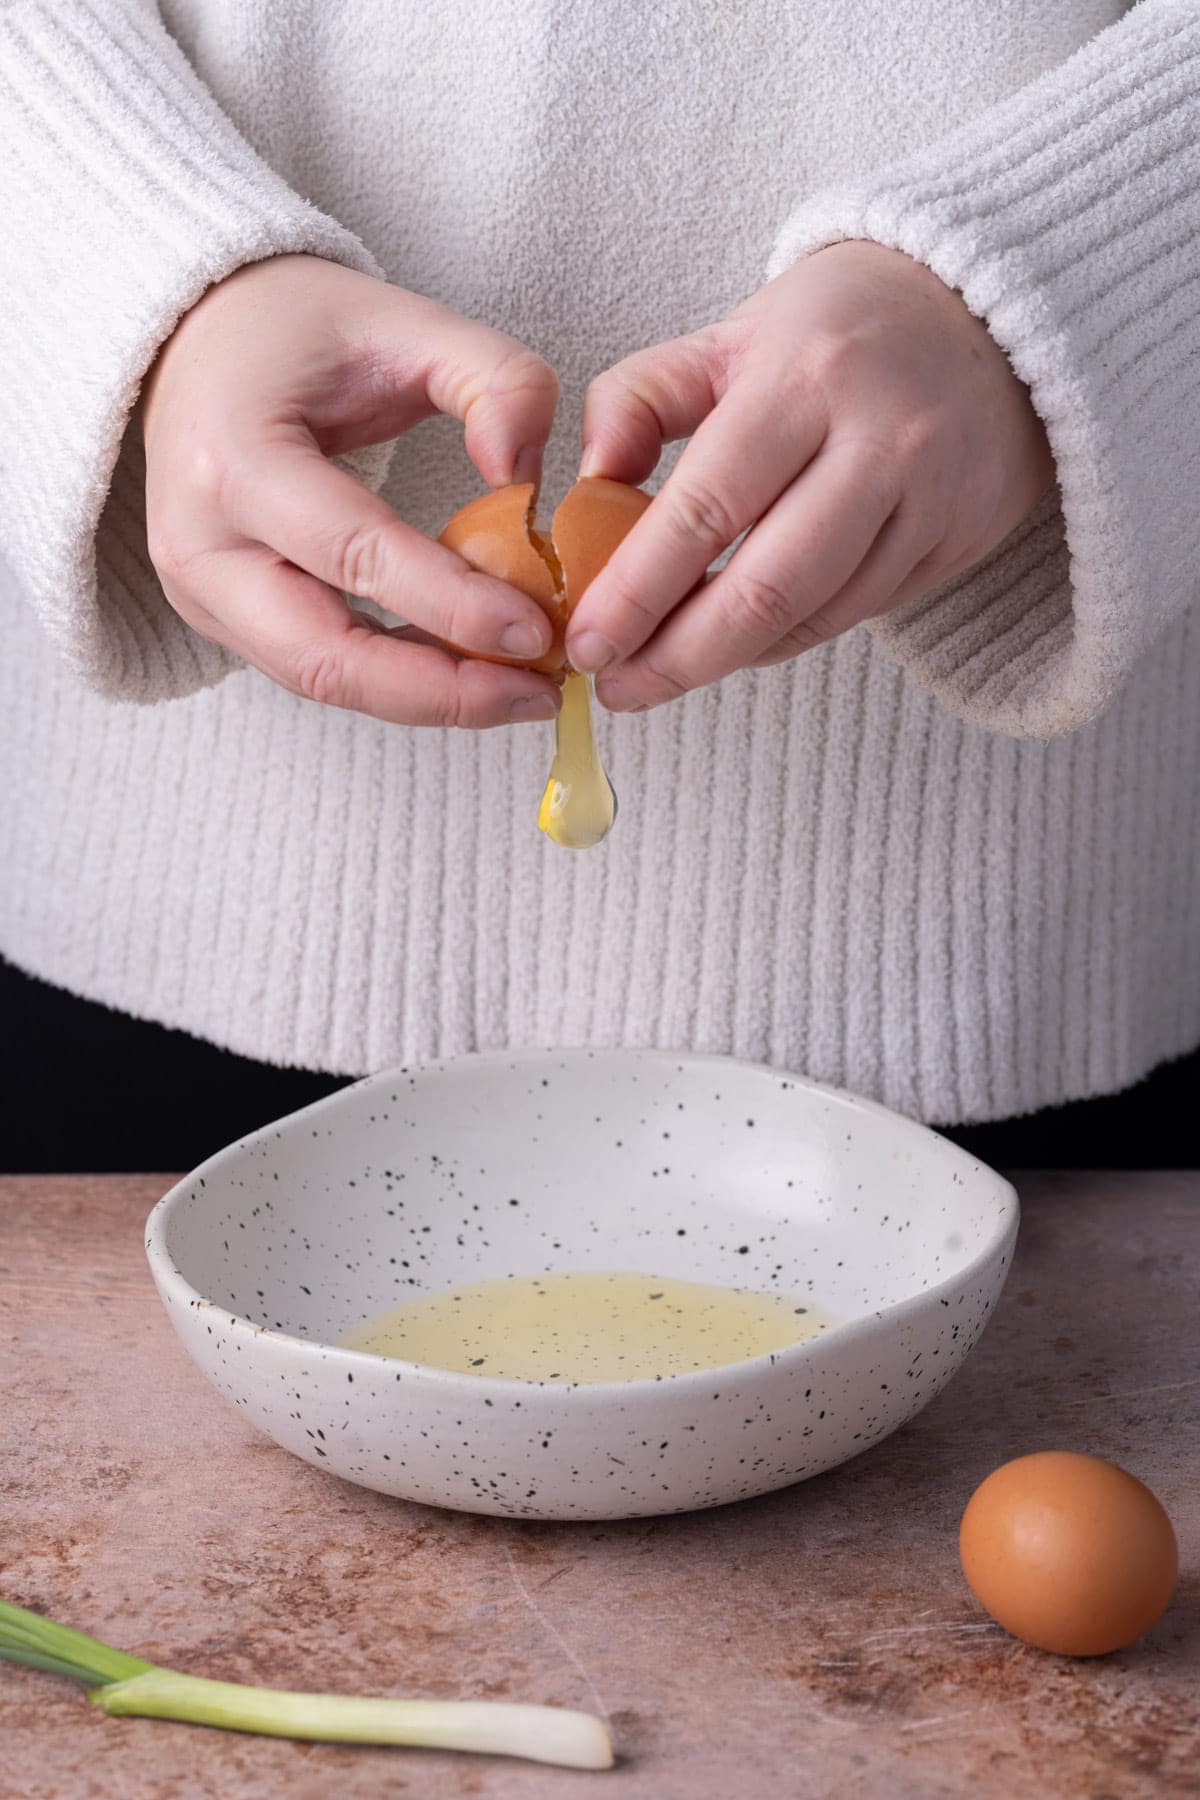 Cracking eggs into a shallow bowl to beat to make an omelet. 